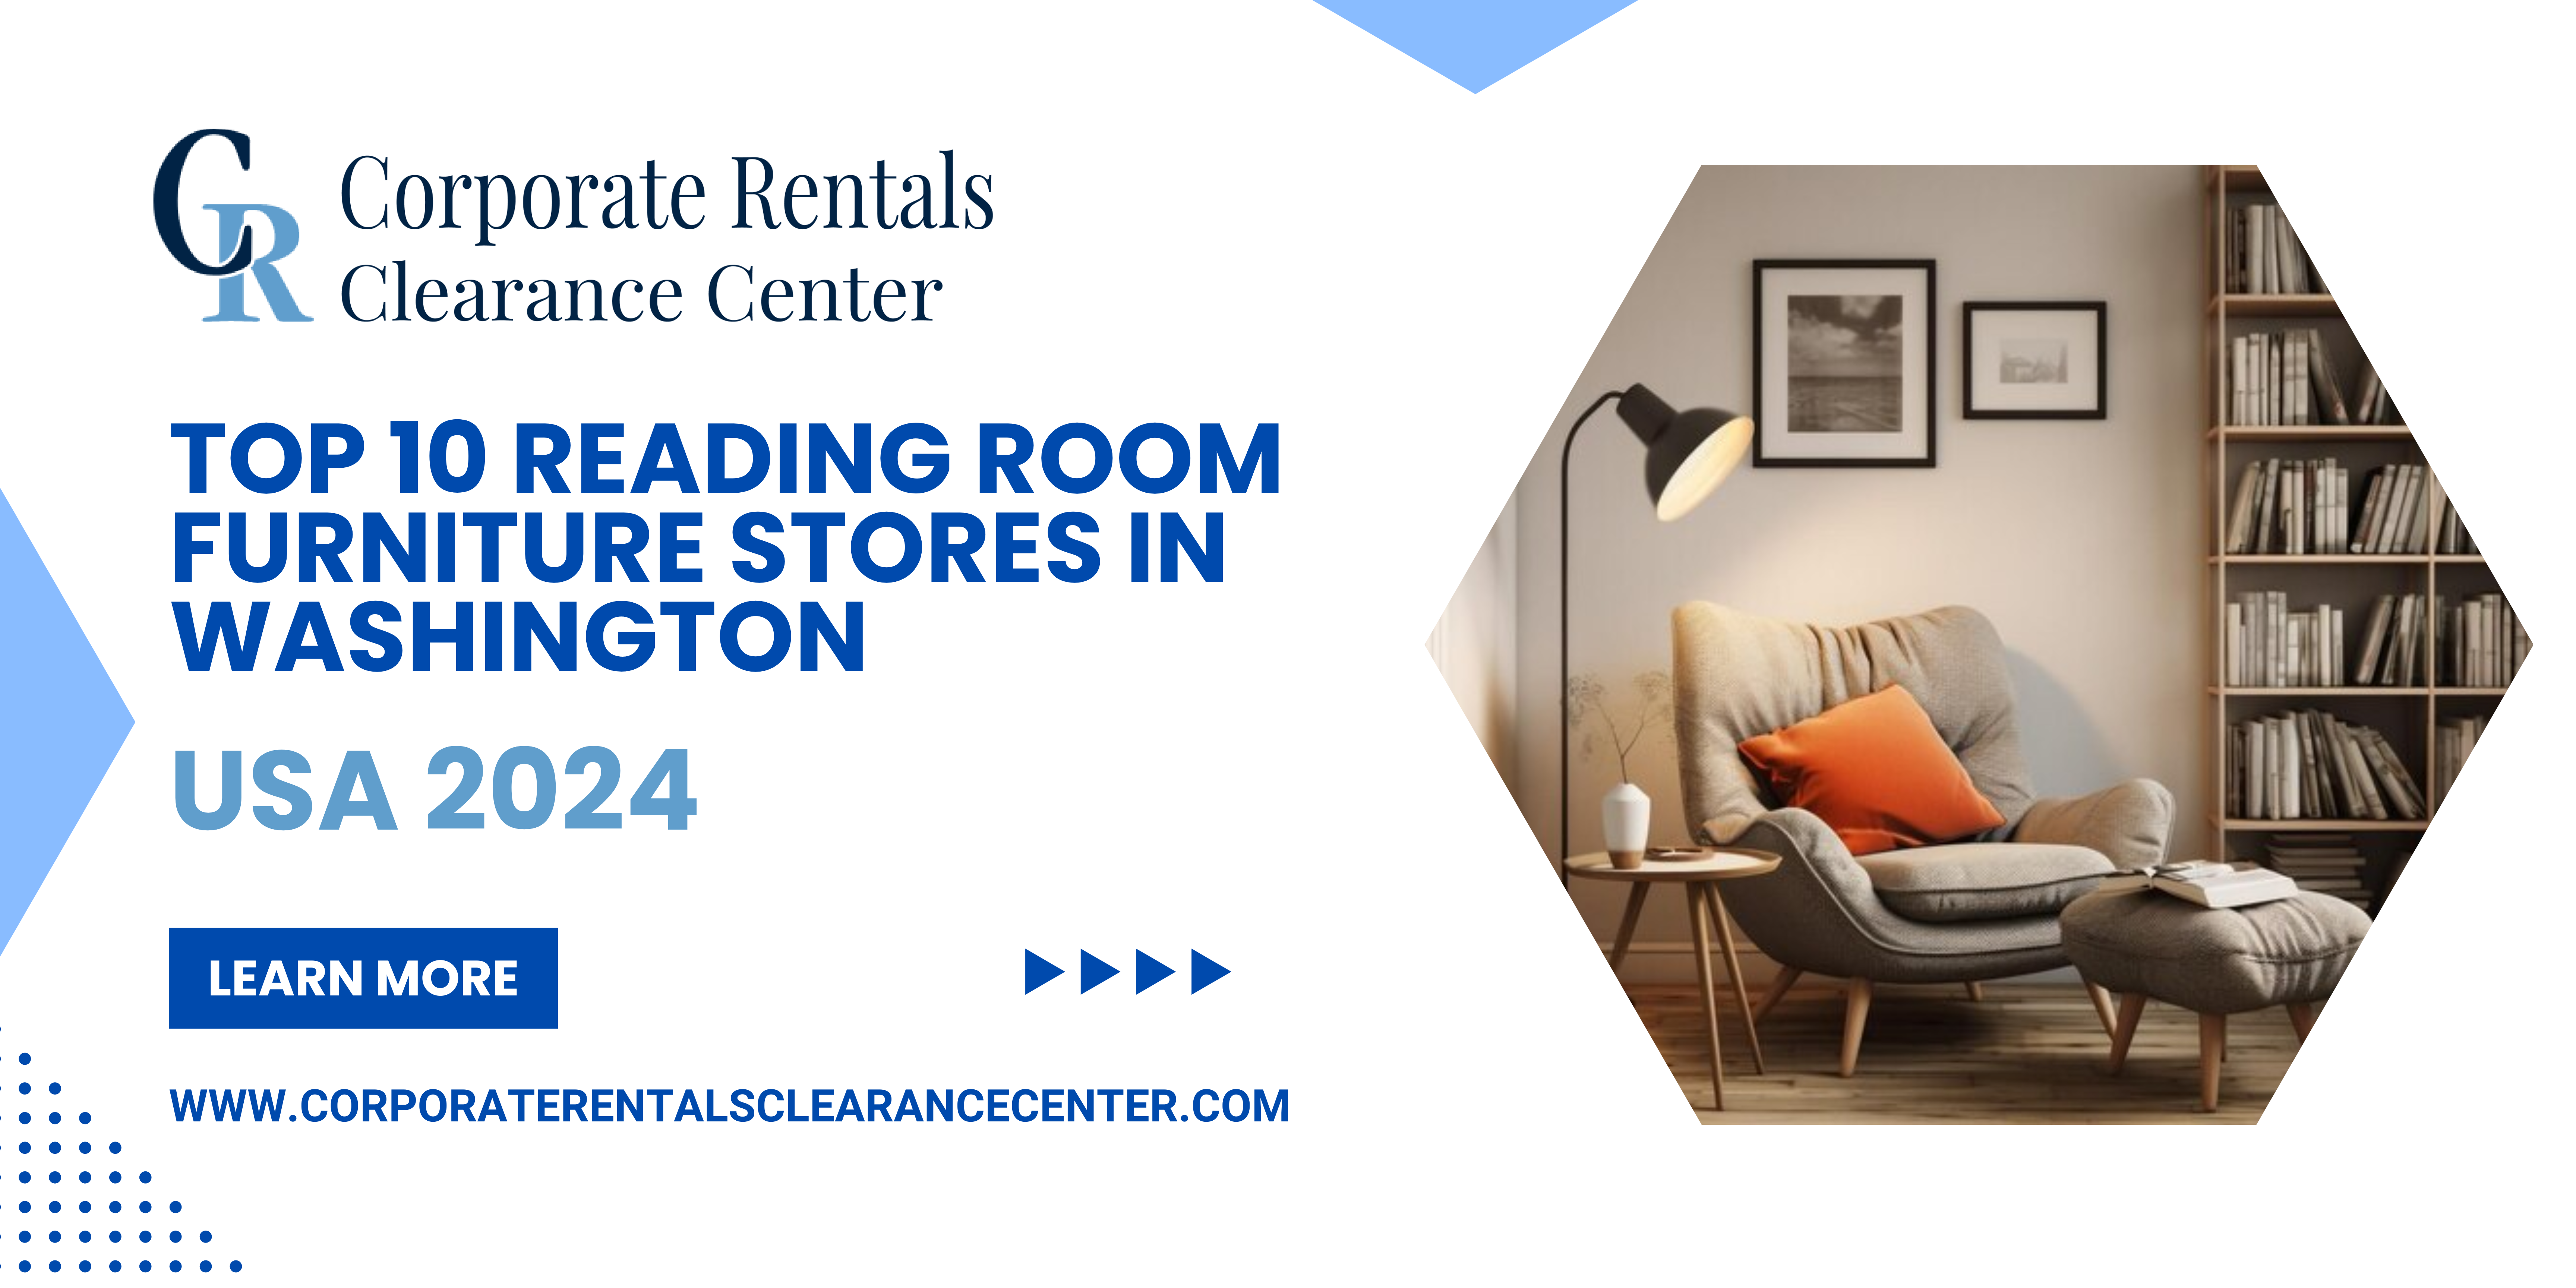 Top 10 Reading Room Furniture Stores in Washington (2)